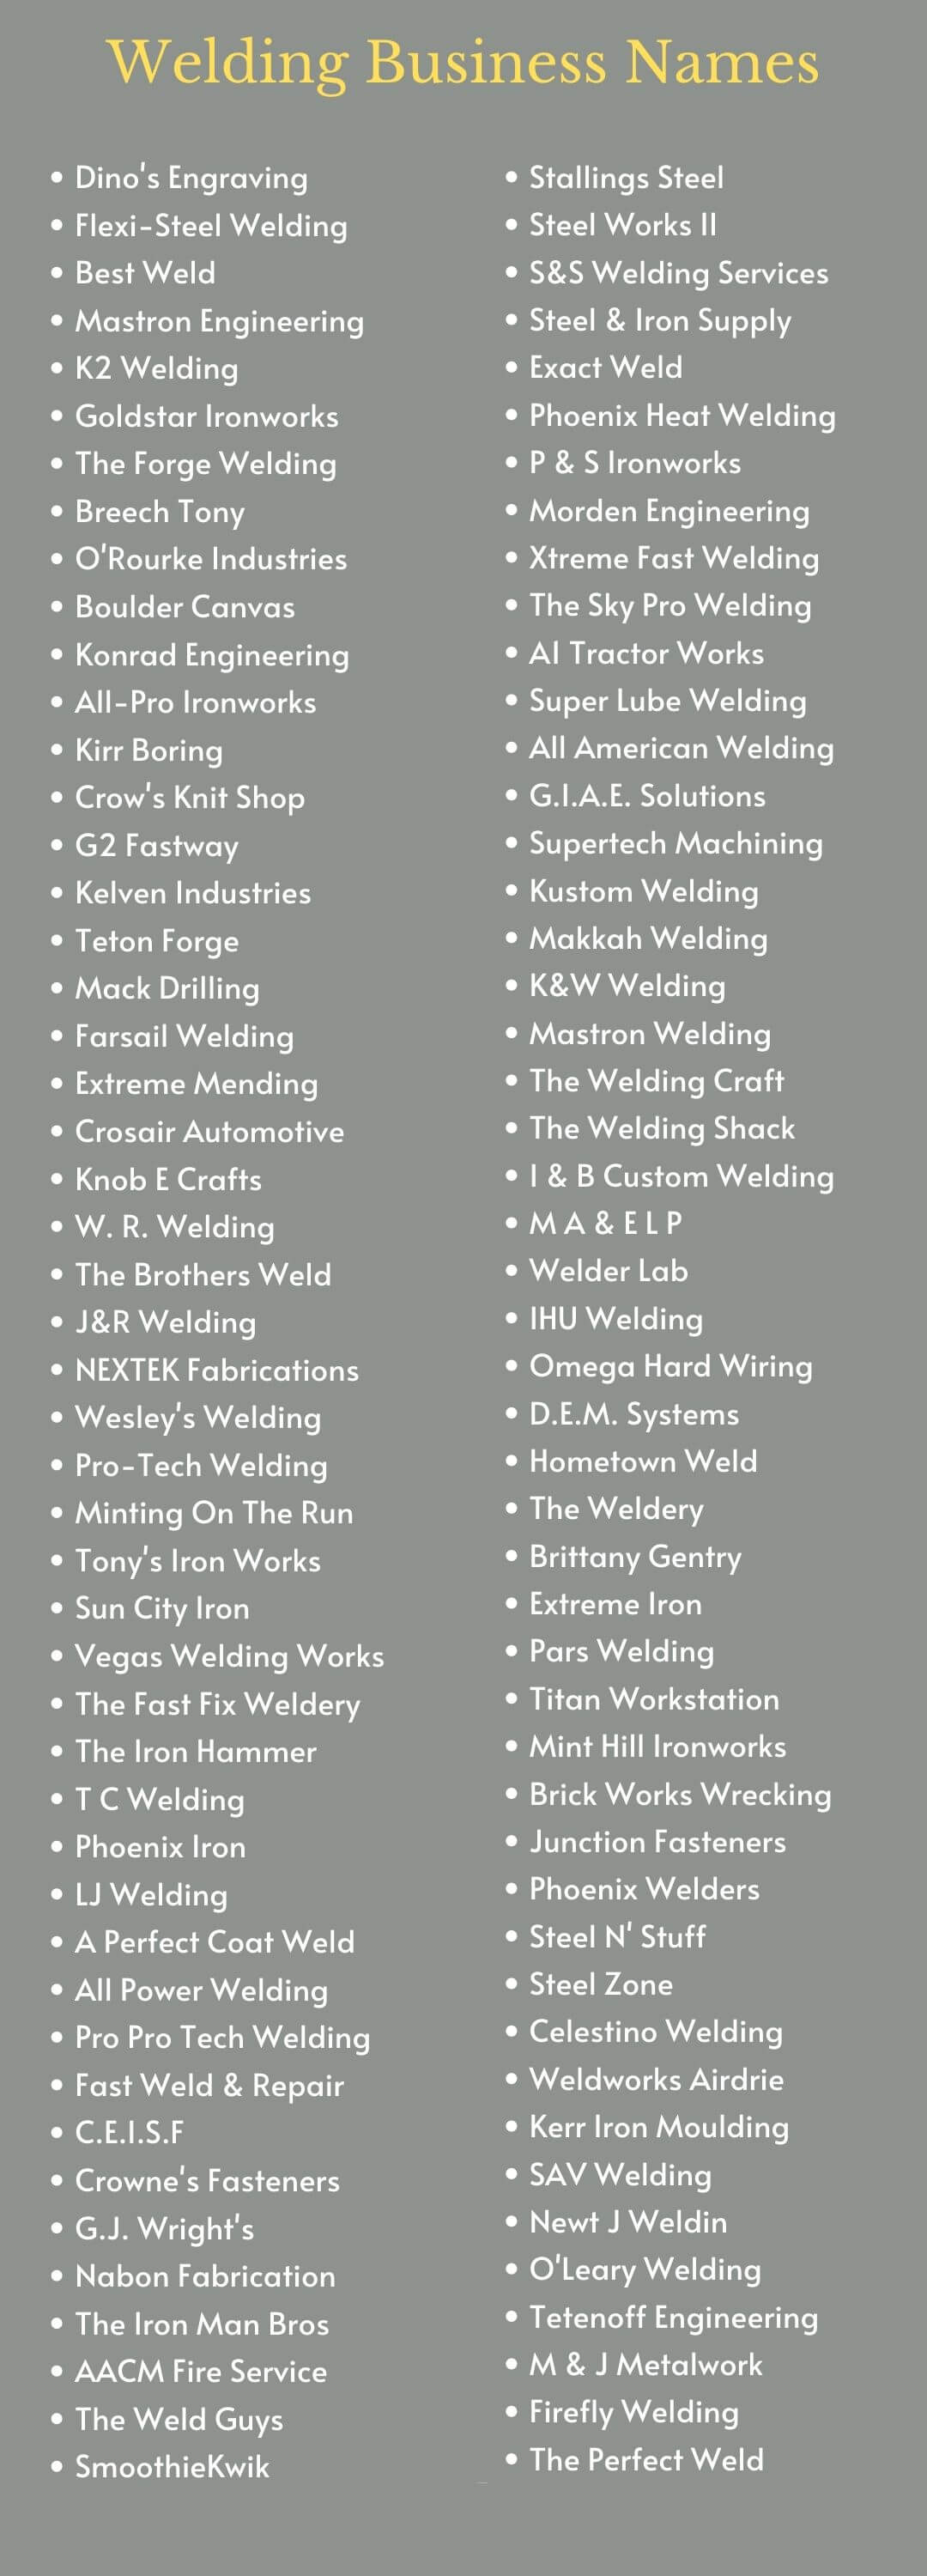 Welding Business Names: Infographic